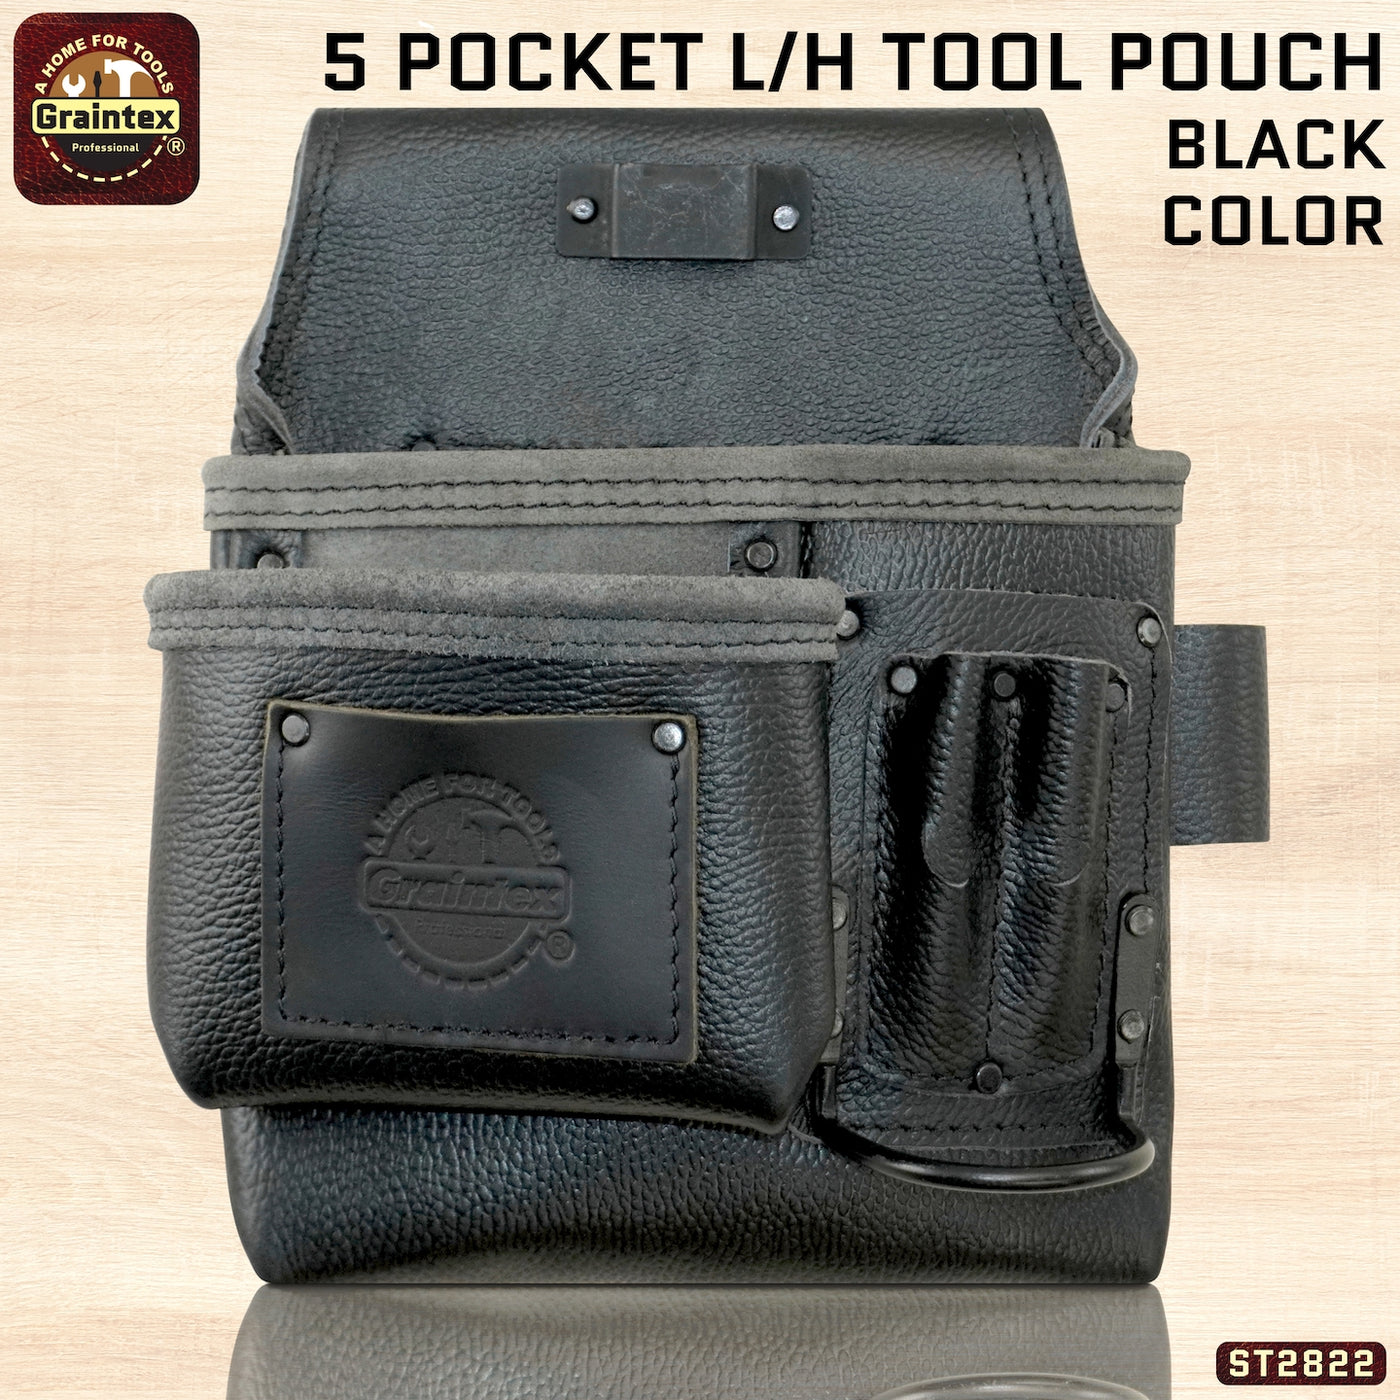 ST2822 :: 5 Pocket Left Handed Nail & Tool Pouch RUGGED Black Color Top Grain Leather